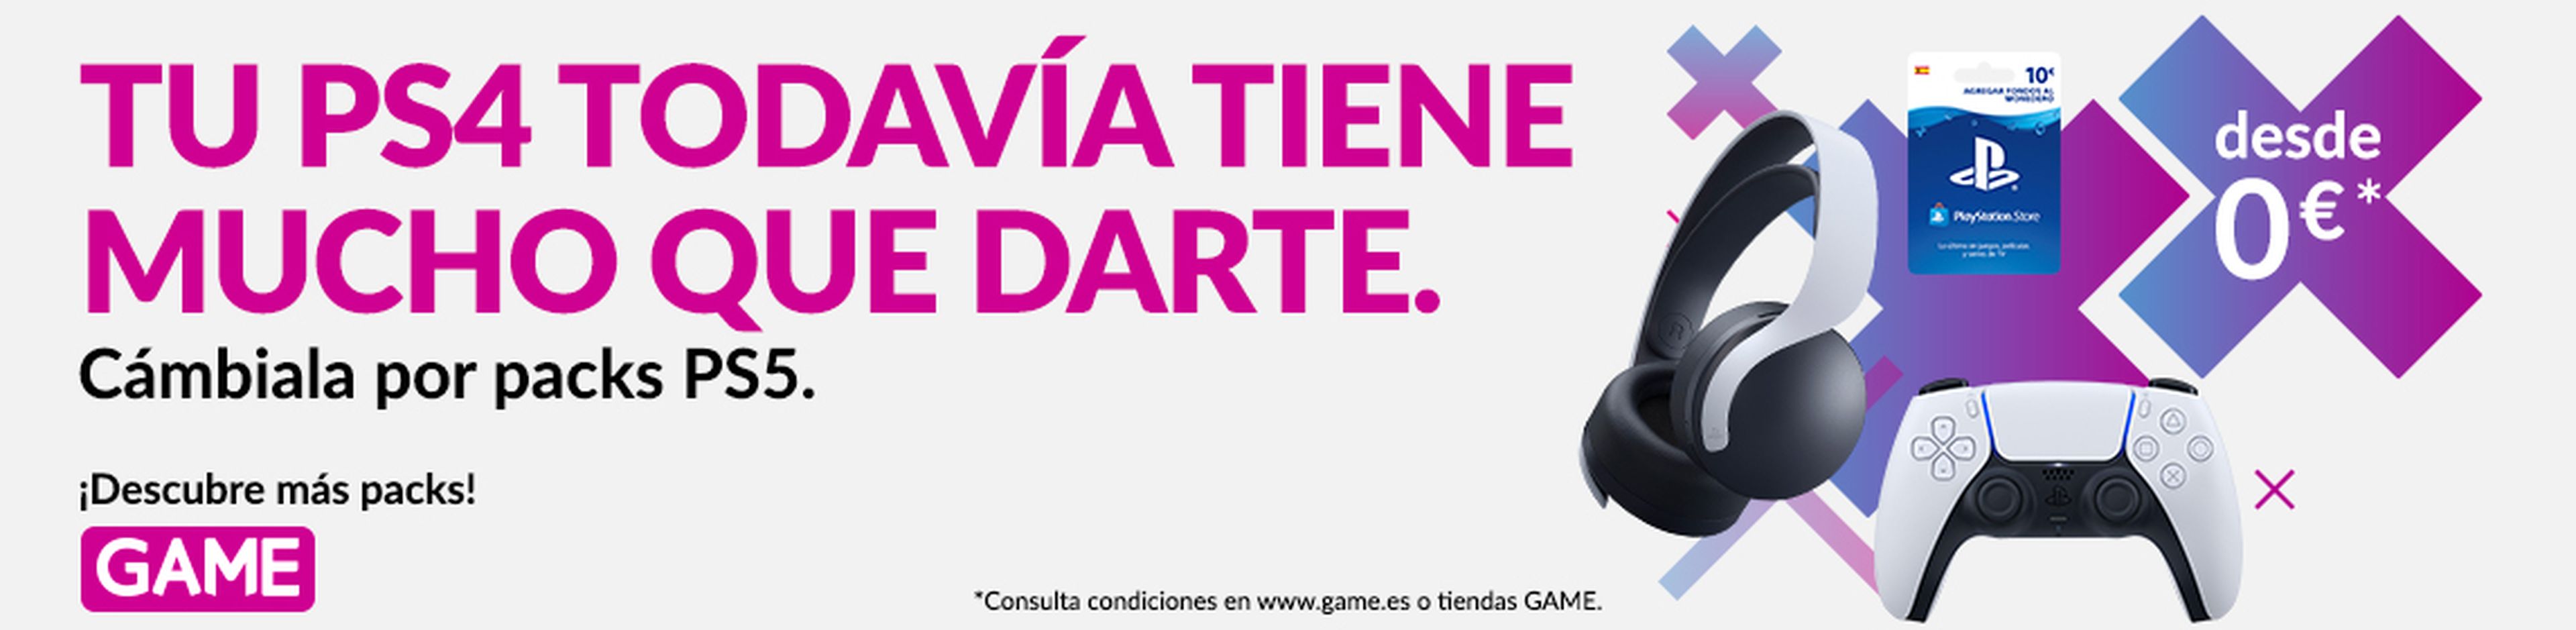 Sony y GAME